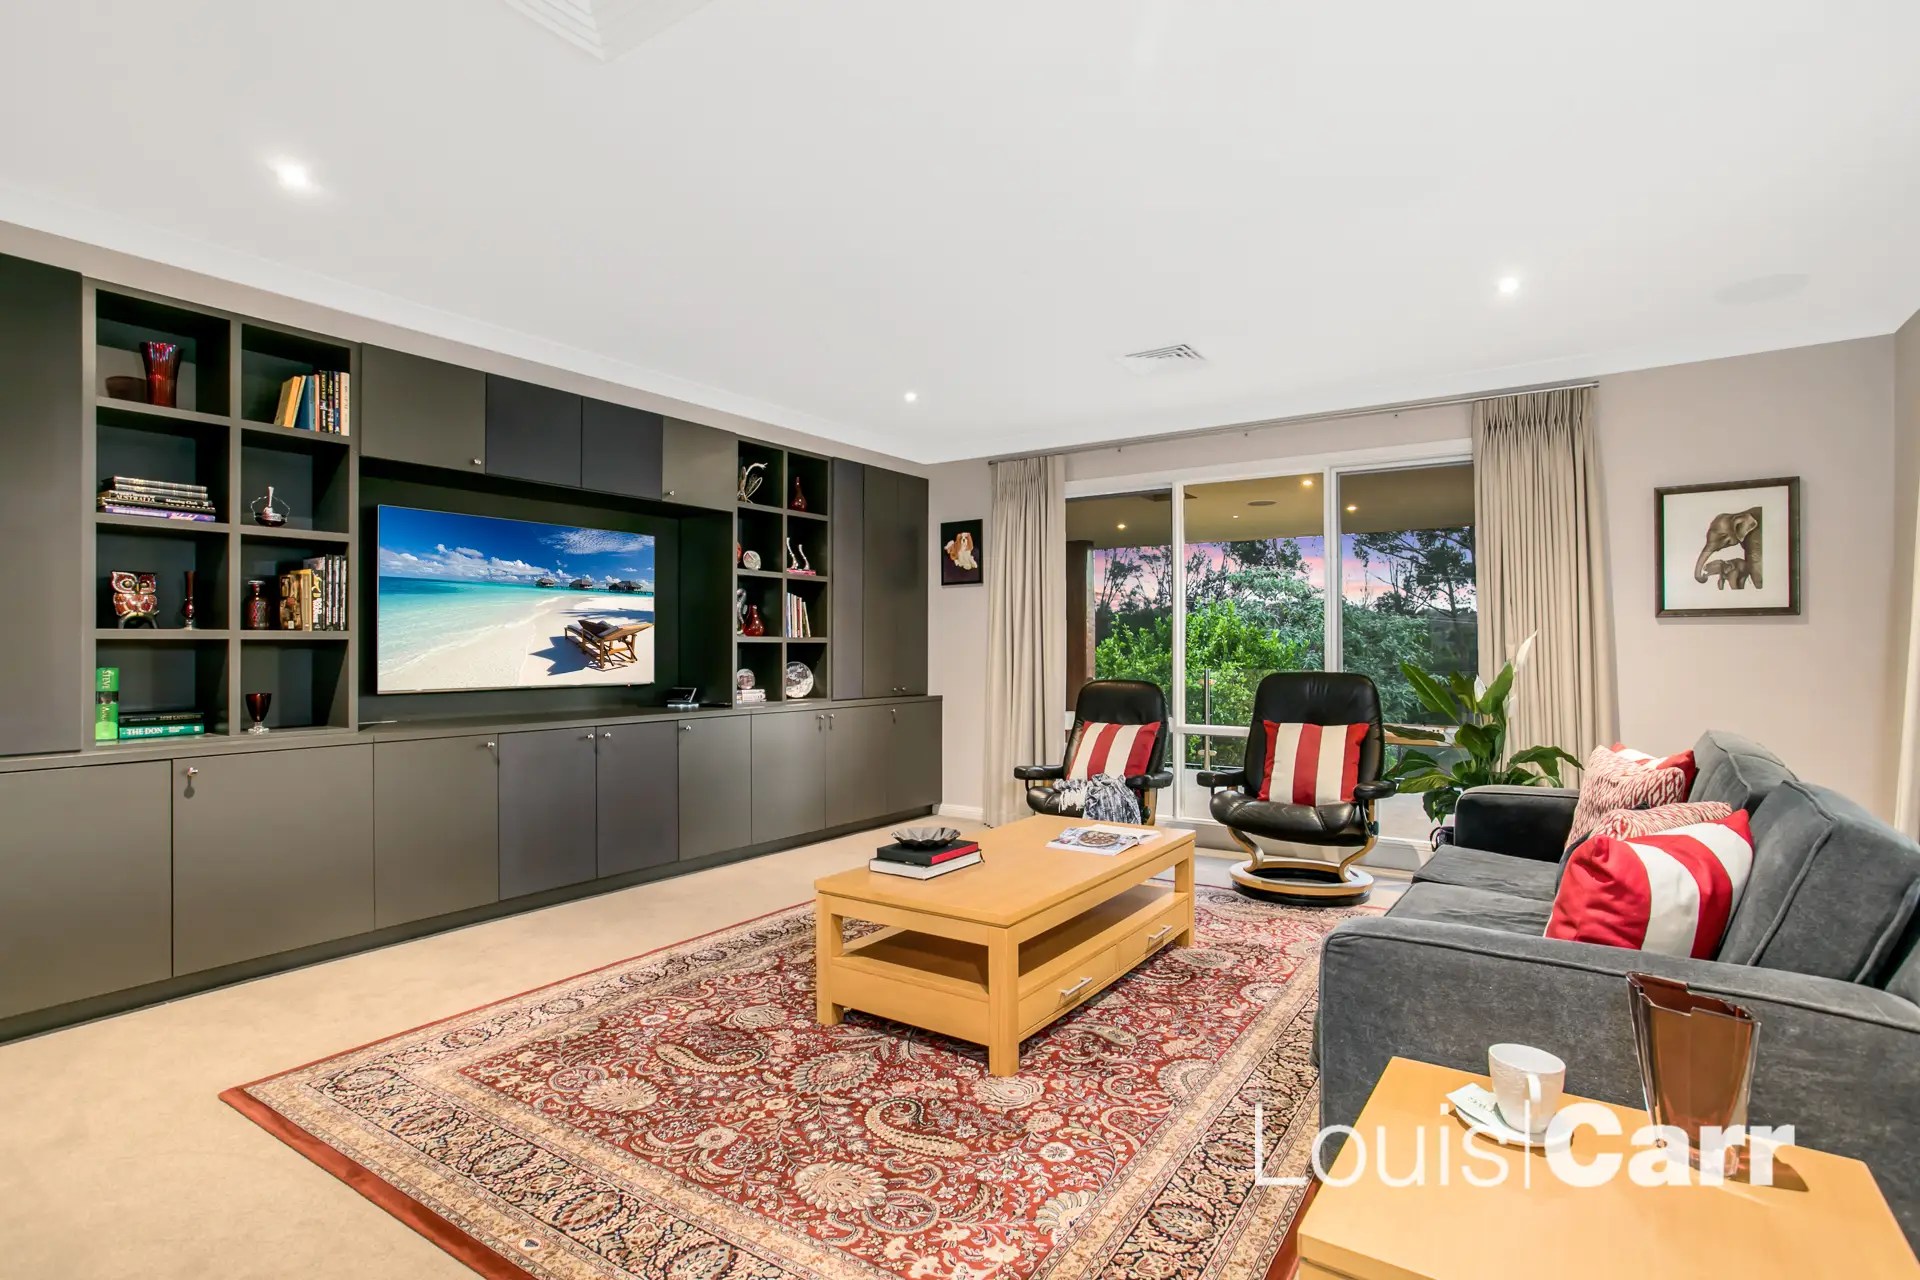 Photo #8: 20 Governor Phillip Place, West Pennant Hills - Sold by Louis Carr Real Estate